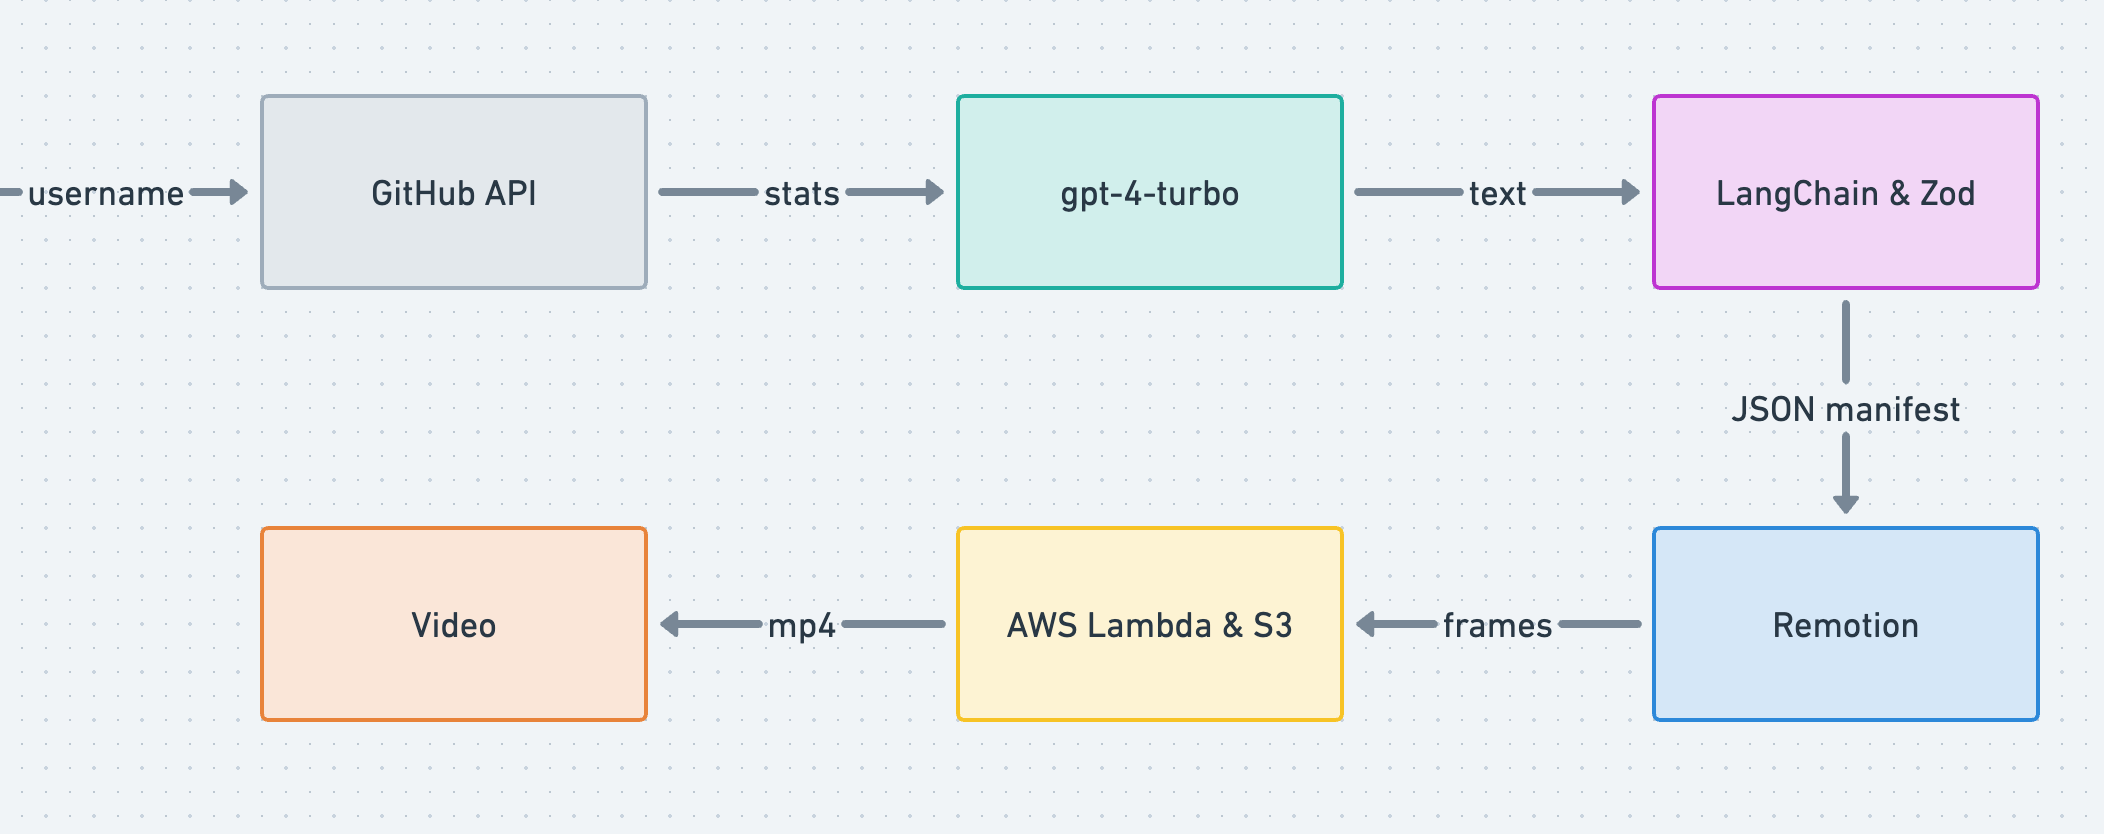 Flowchart showing the architecture of Year in Code. GitHub API, gpt-4-turbo, LangChain and Zod, Remotion, AWS Lambda, to video.